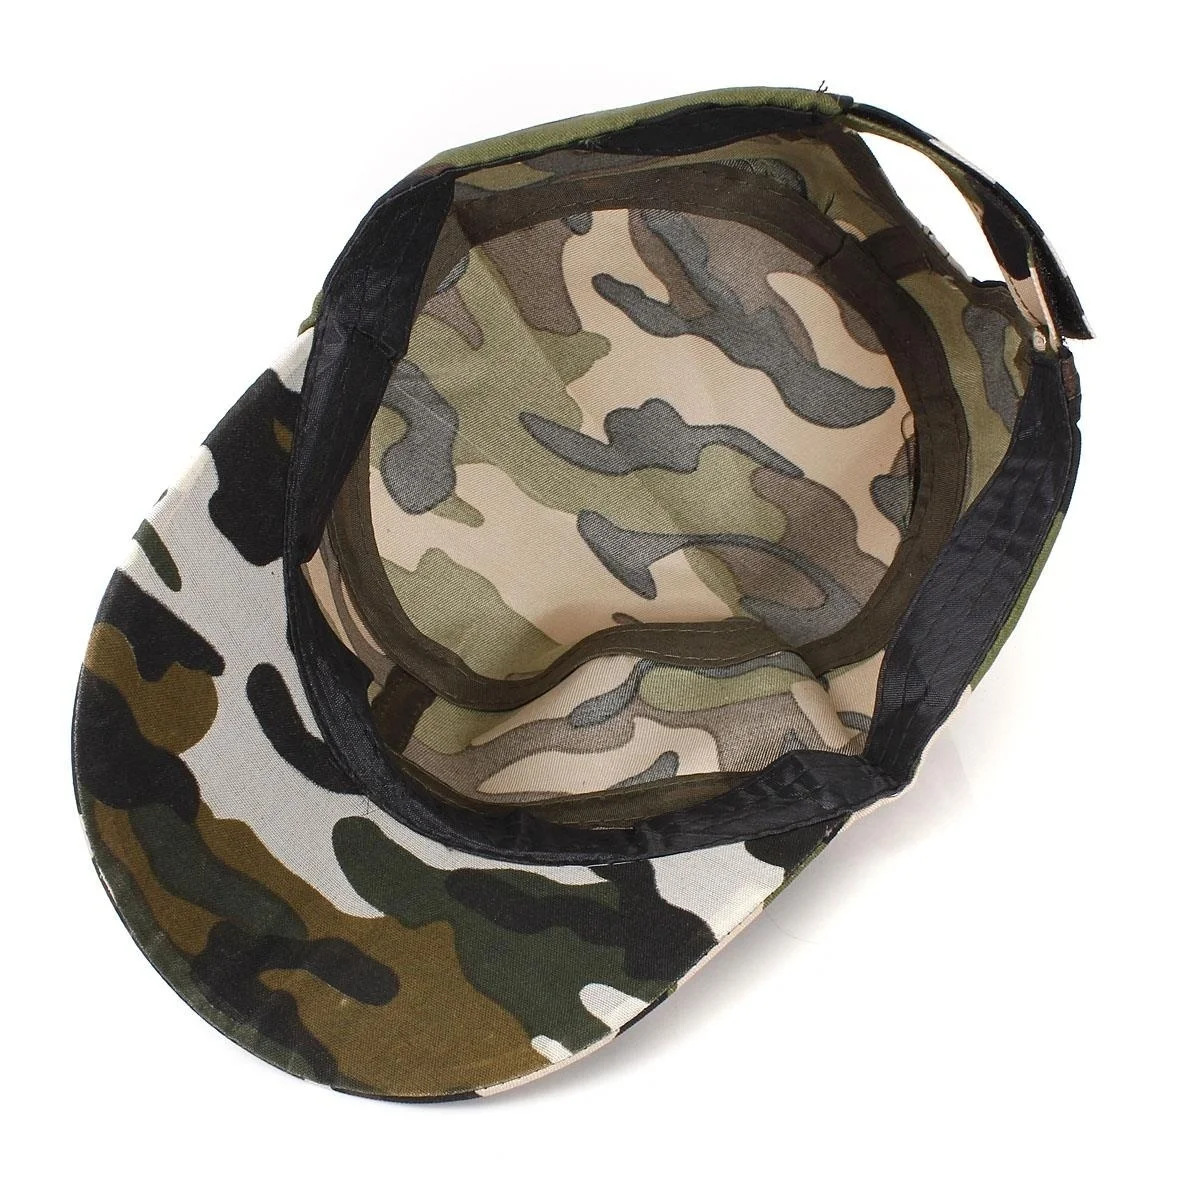 Army Military Camouflage Tatical Cap Airsoft Paintball Outdoor Hunting Baseball Caps Women Men Soldier Combat Sun Hat